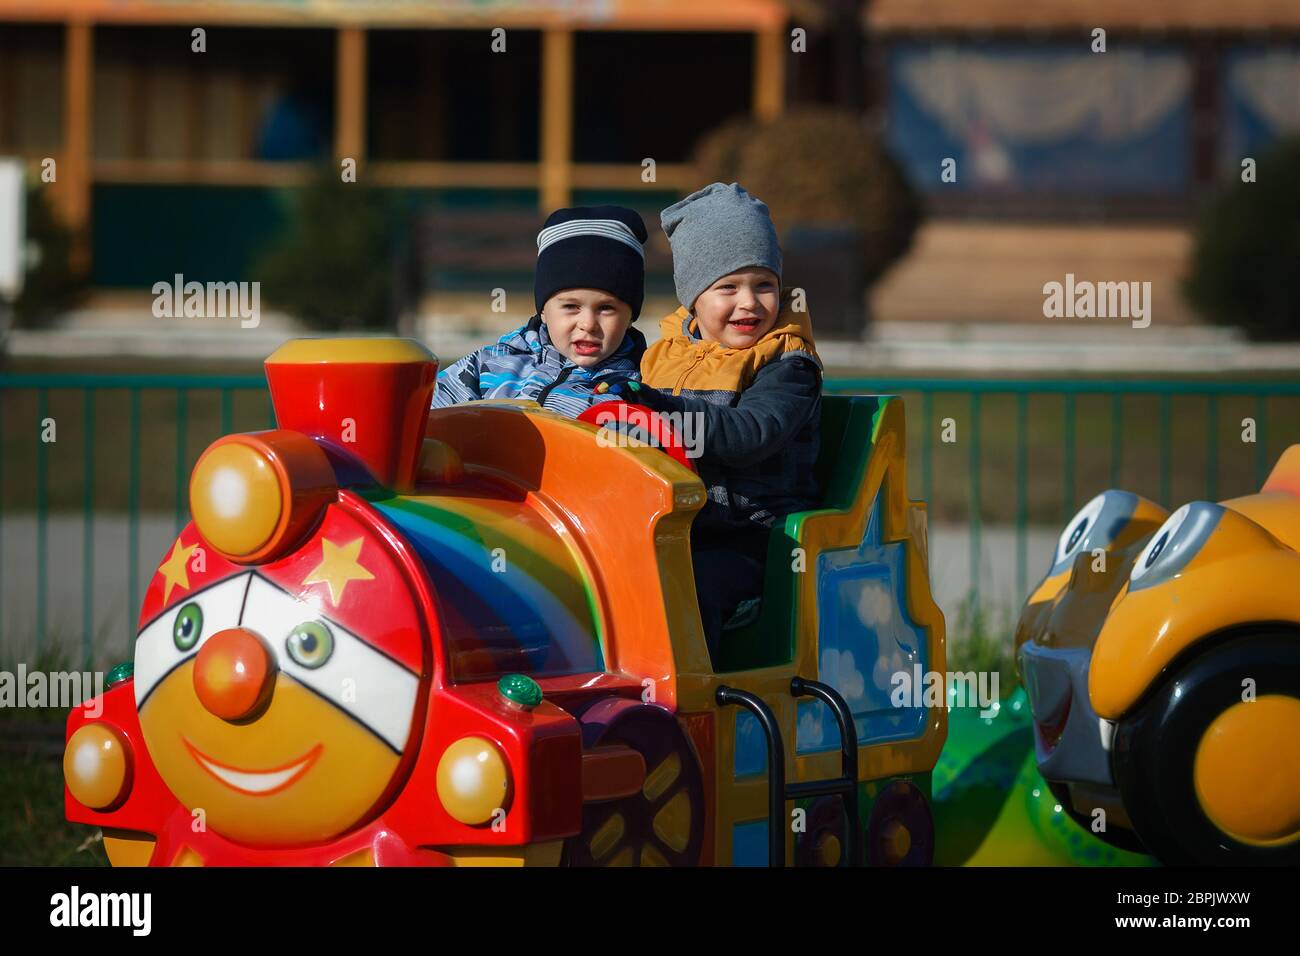 Children's rest in the amusement park. Two boys ride a children's colored locomotive by rail. Happy children on a walk on an autumn day. Stock Photo